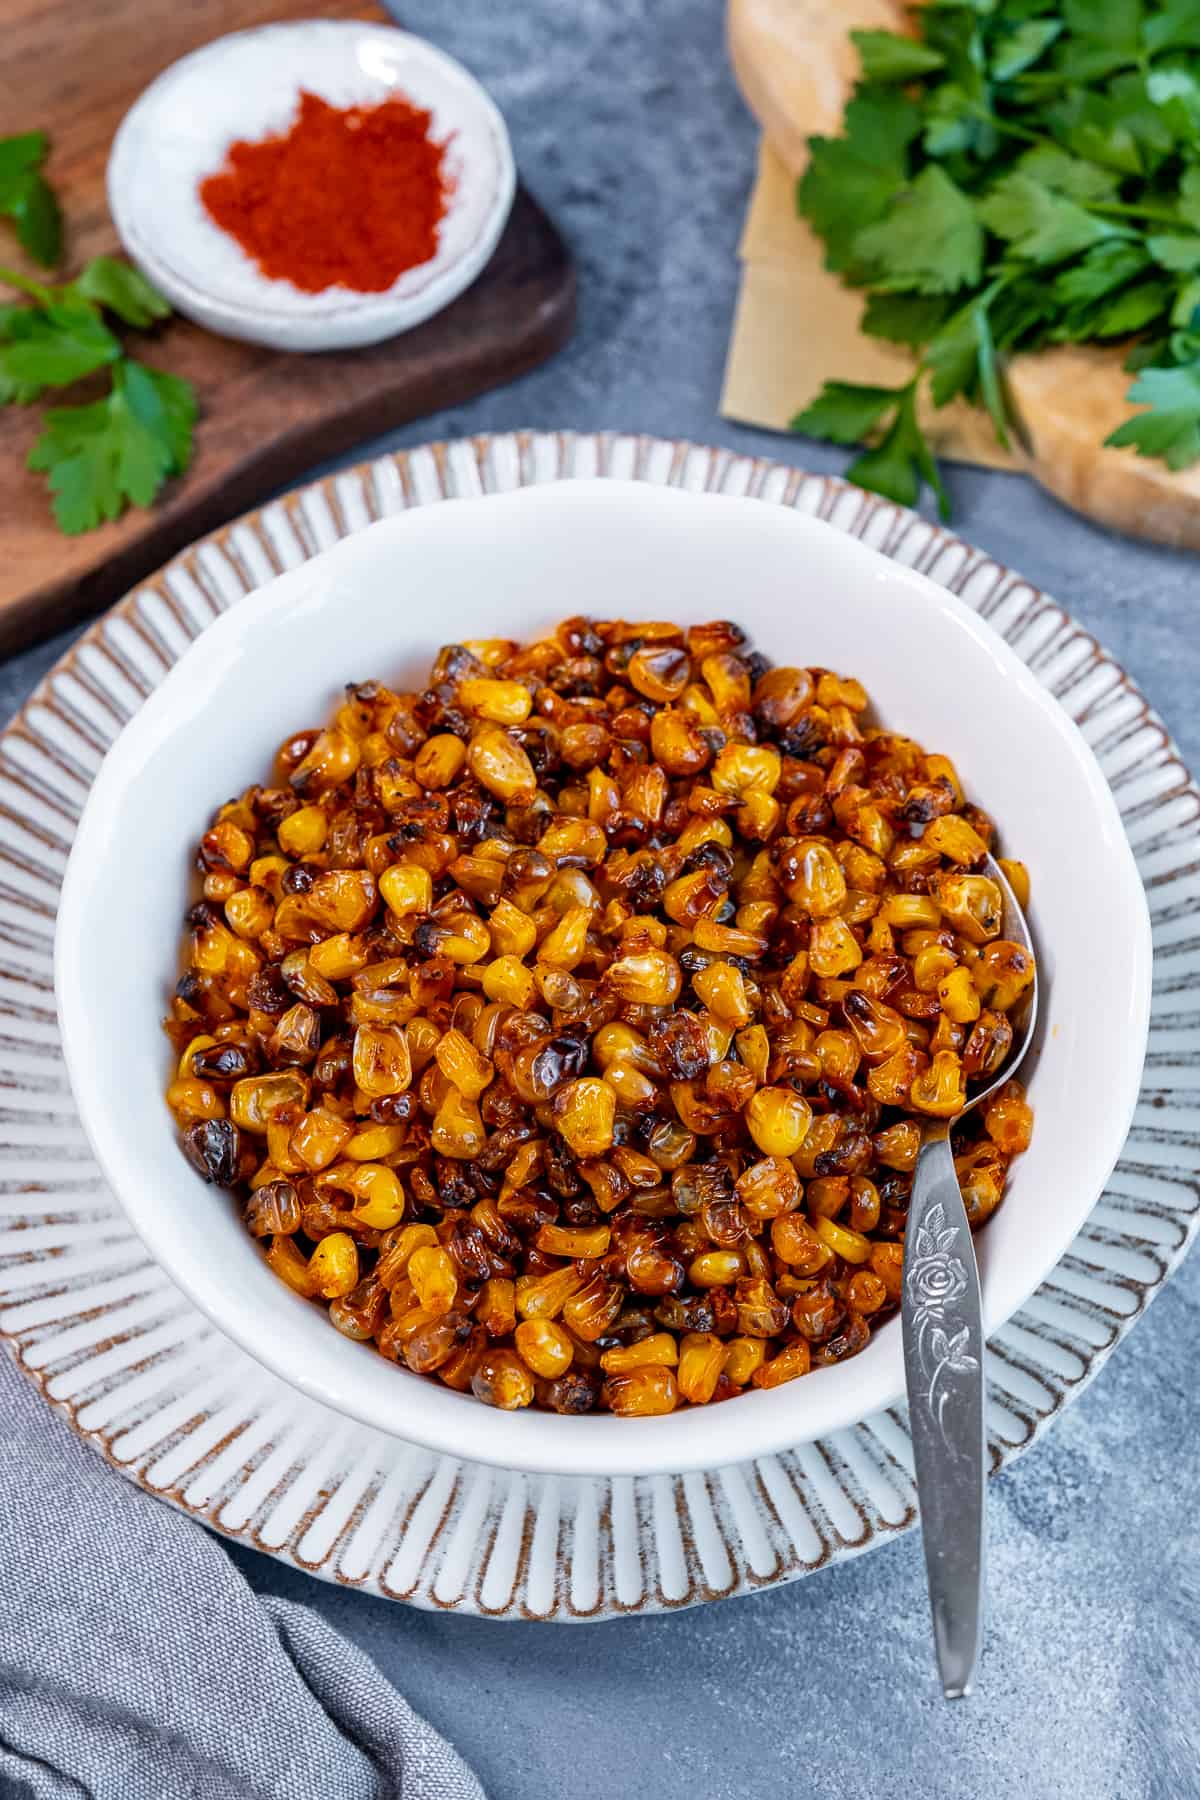 Roasted corn kernels in a white bowl, paprika and parsley on the side.